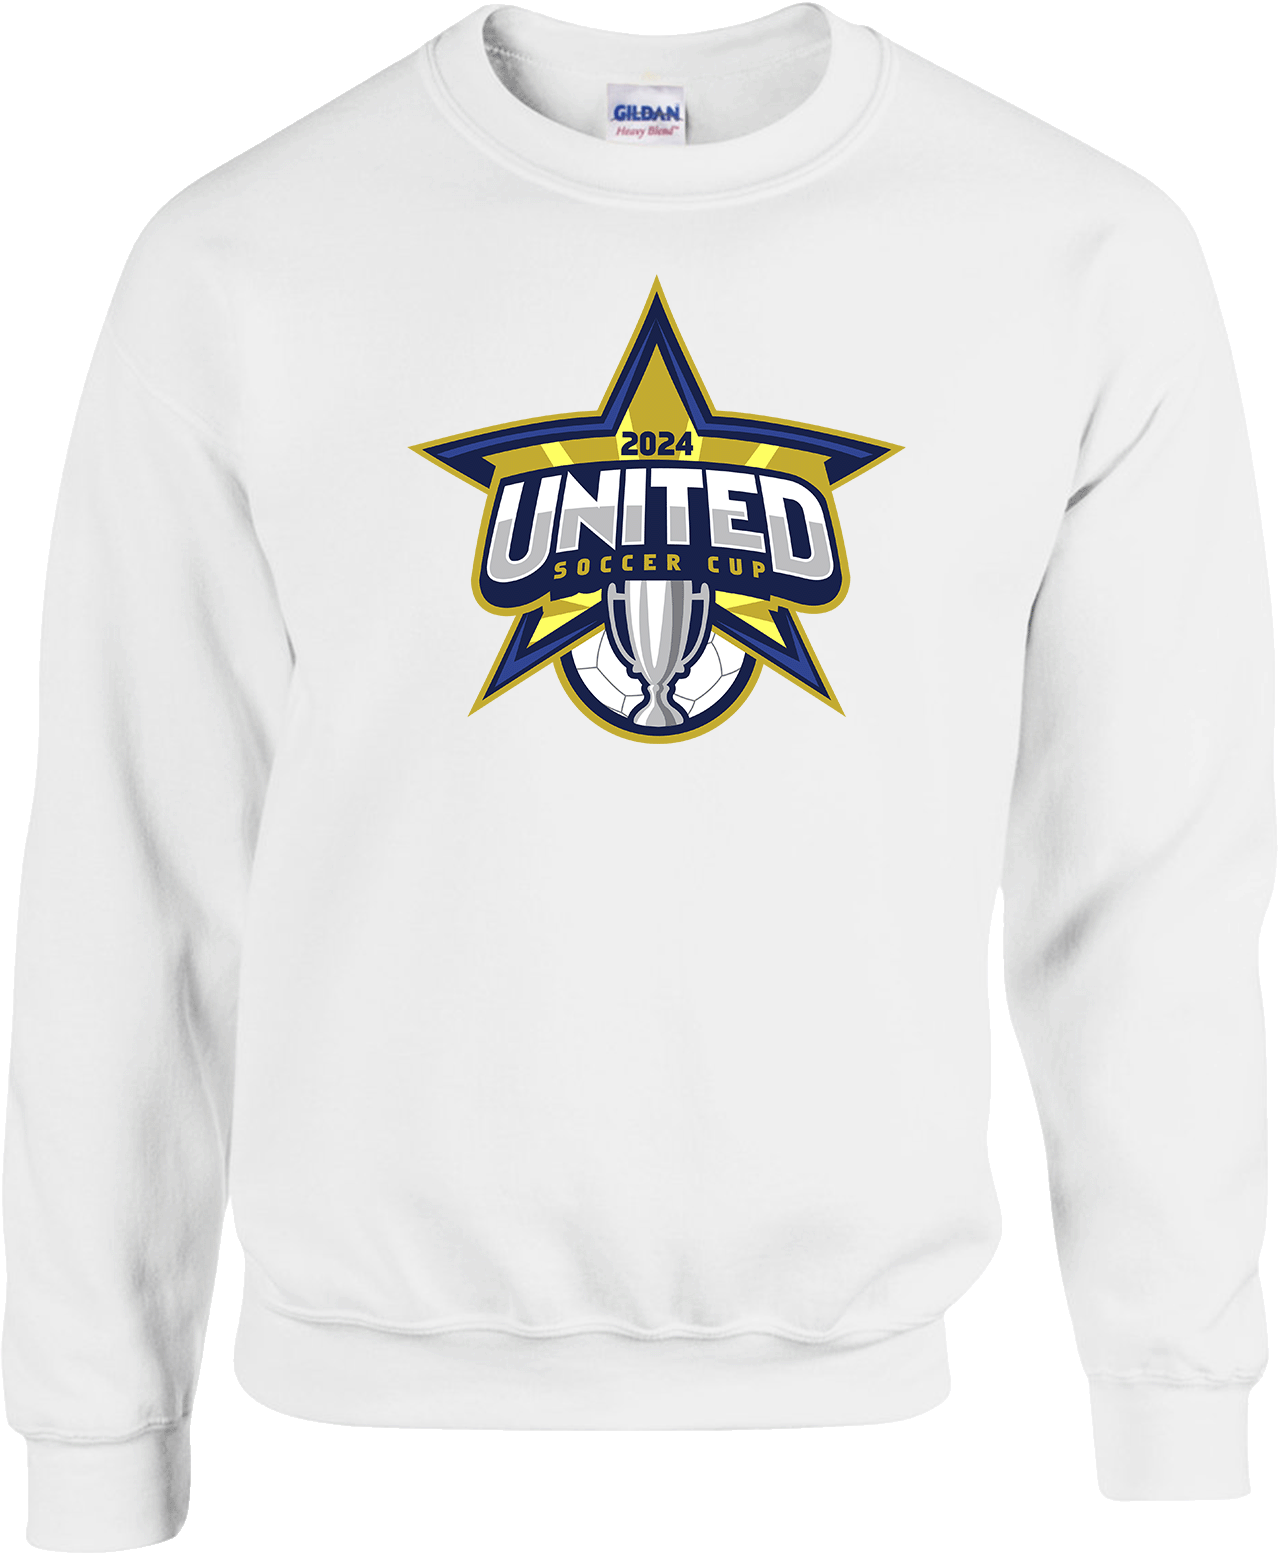 Crew Sweatershirt - 2024 United Soccer Cup